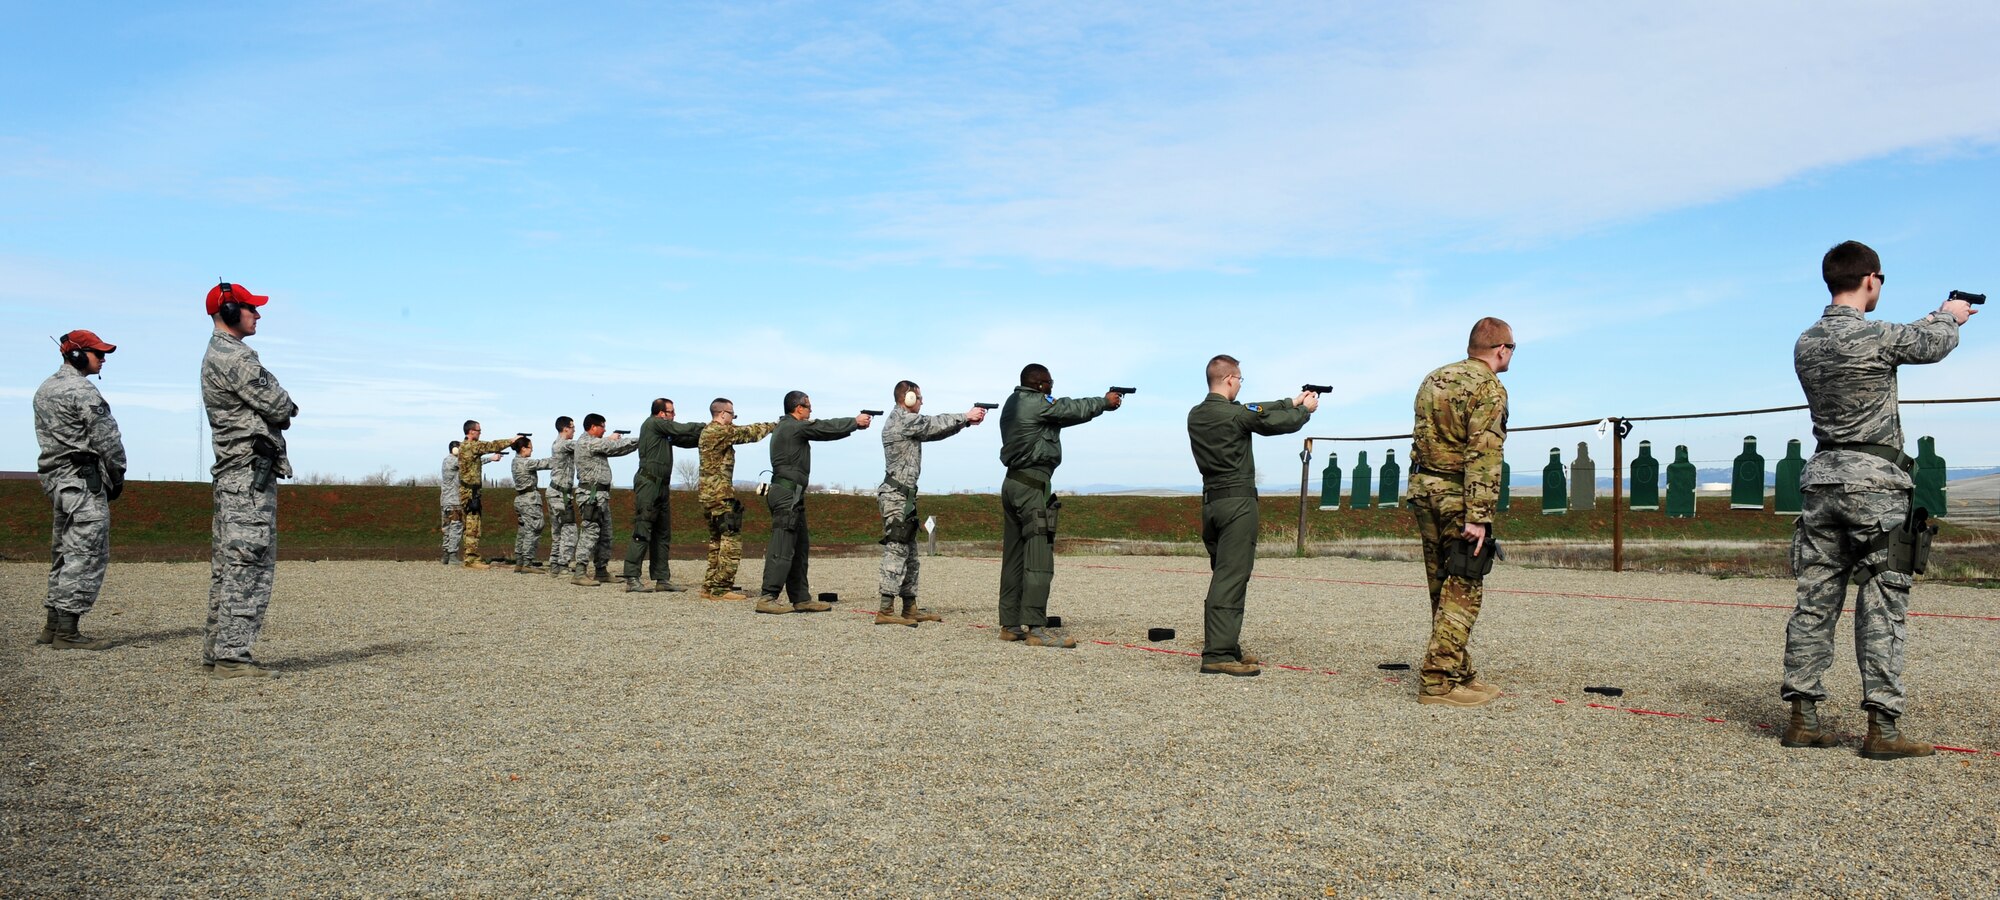 Combat Arms instructors supervise an M-9 weapons qualification course at Beale Air Force Base Calif., Feb. 11, 2014. Students are required to demonstrate marksmanship from distances of seven to 25 meters. (U.S. Air Force photo by Staff Sgt. Robert M. Trujillo/Released)  